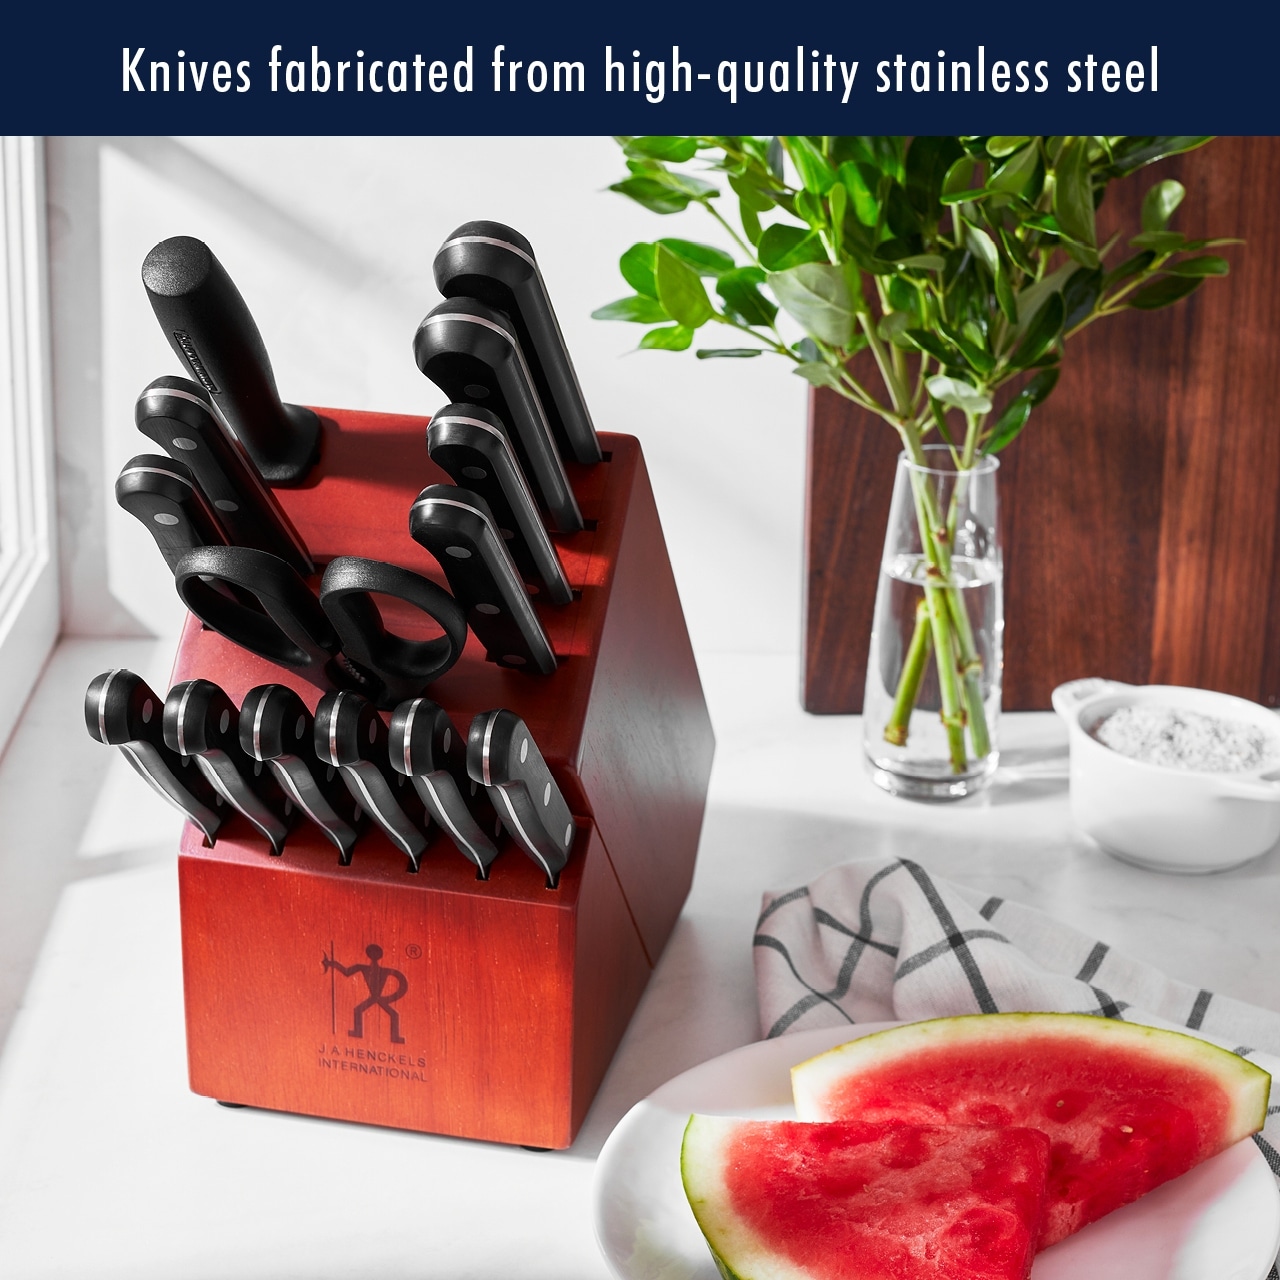 https://ak1.ostkcdn.com/images/products/is/images/direct/04f336a8674dce4e66fdd7a8e02ec52ee9960f64/Solution-15-pc-Knife-Block-Set.jpg